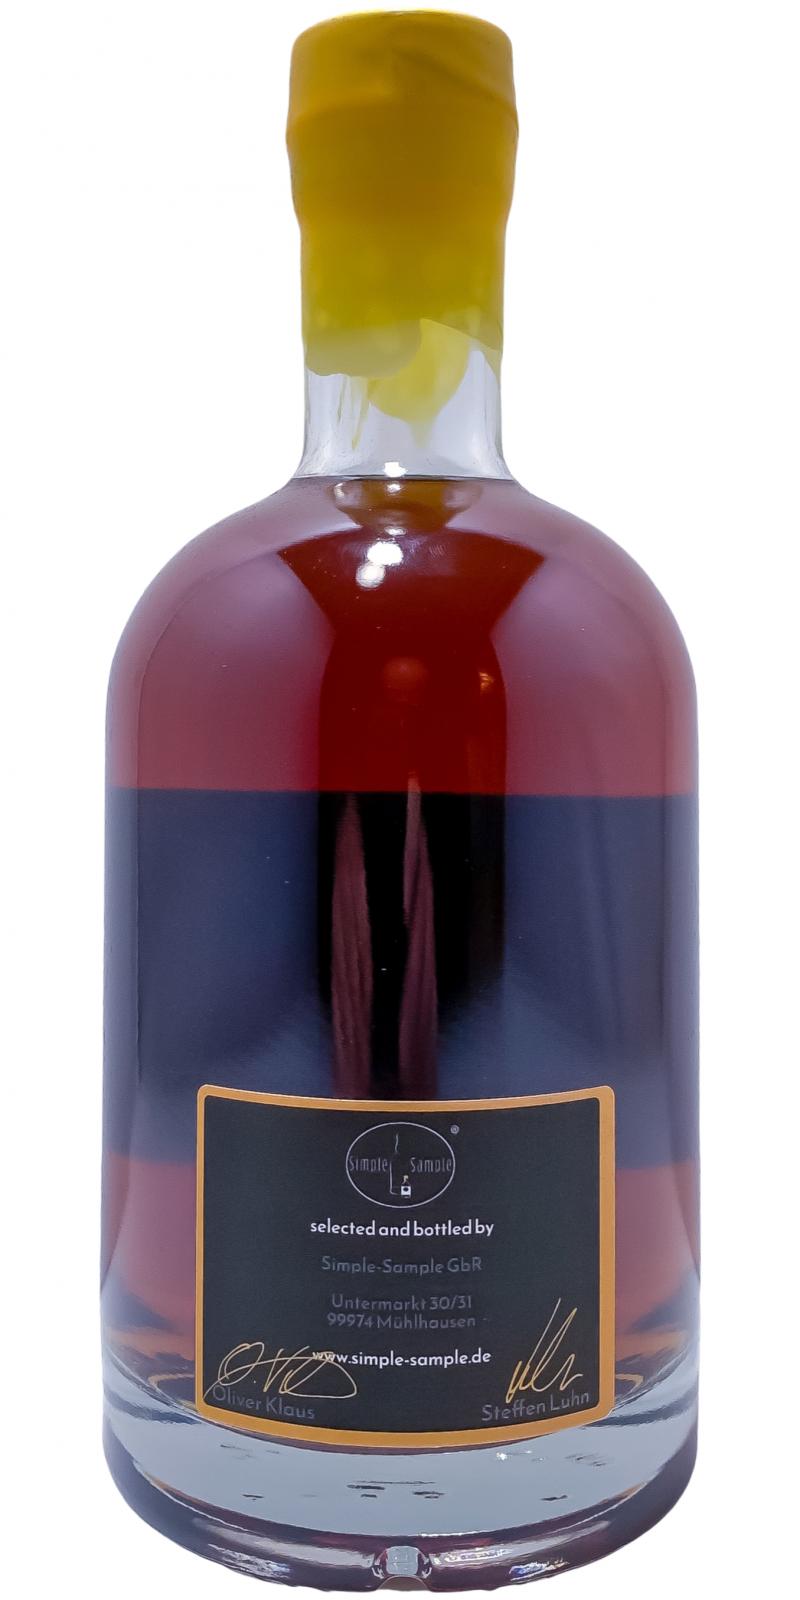 Simple Sample The Sherry Bomb 1st Edition 52.3% 700ml